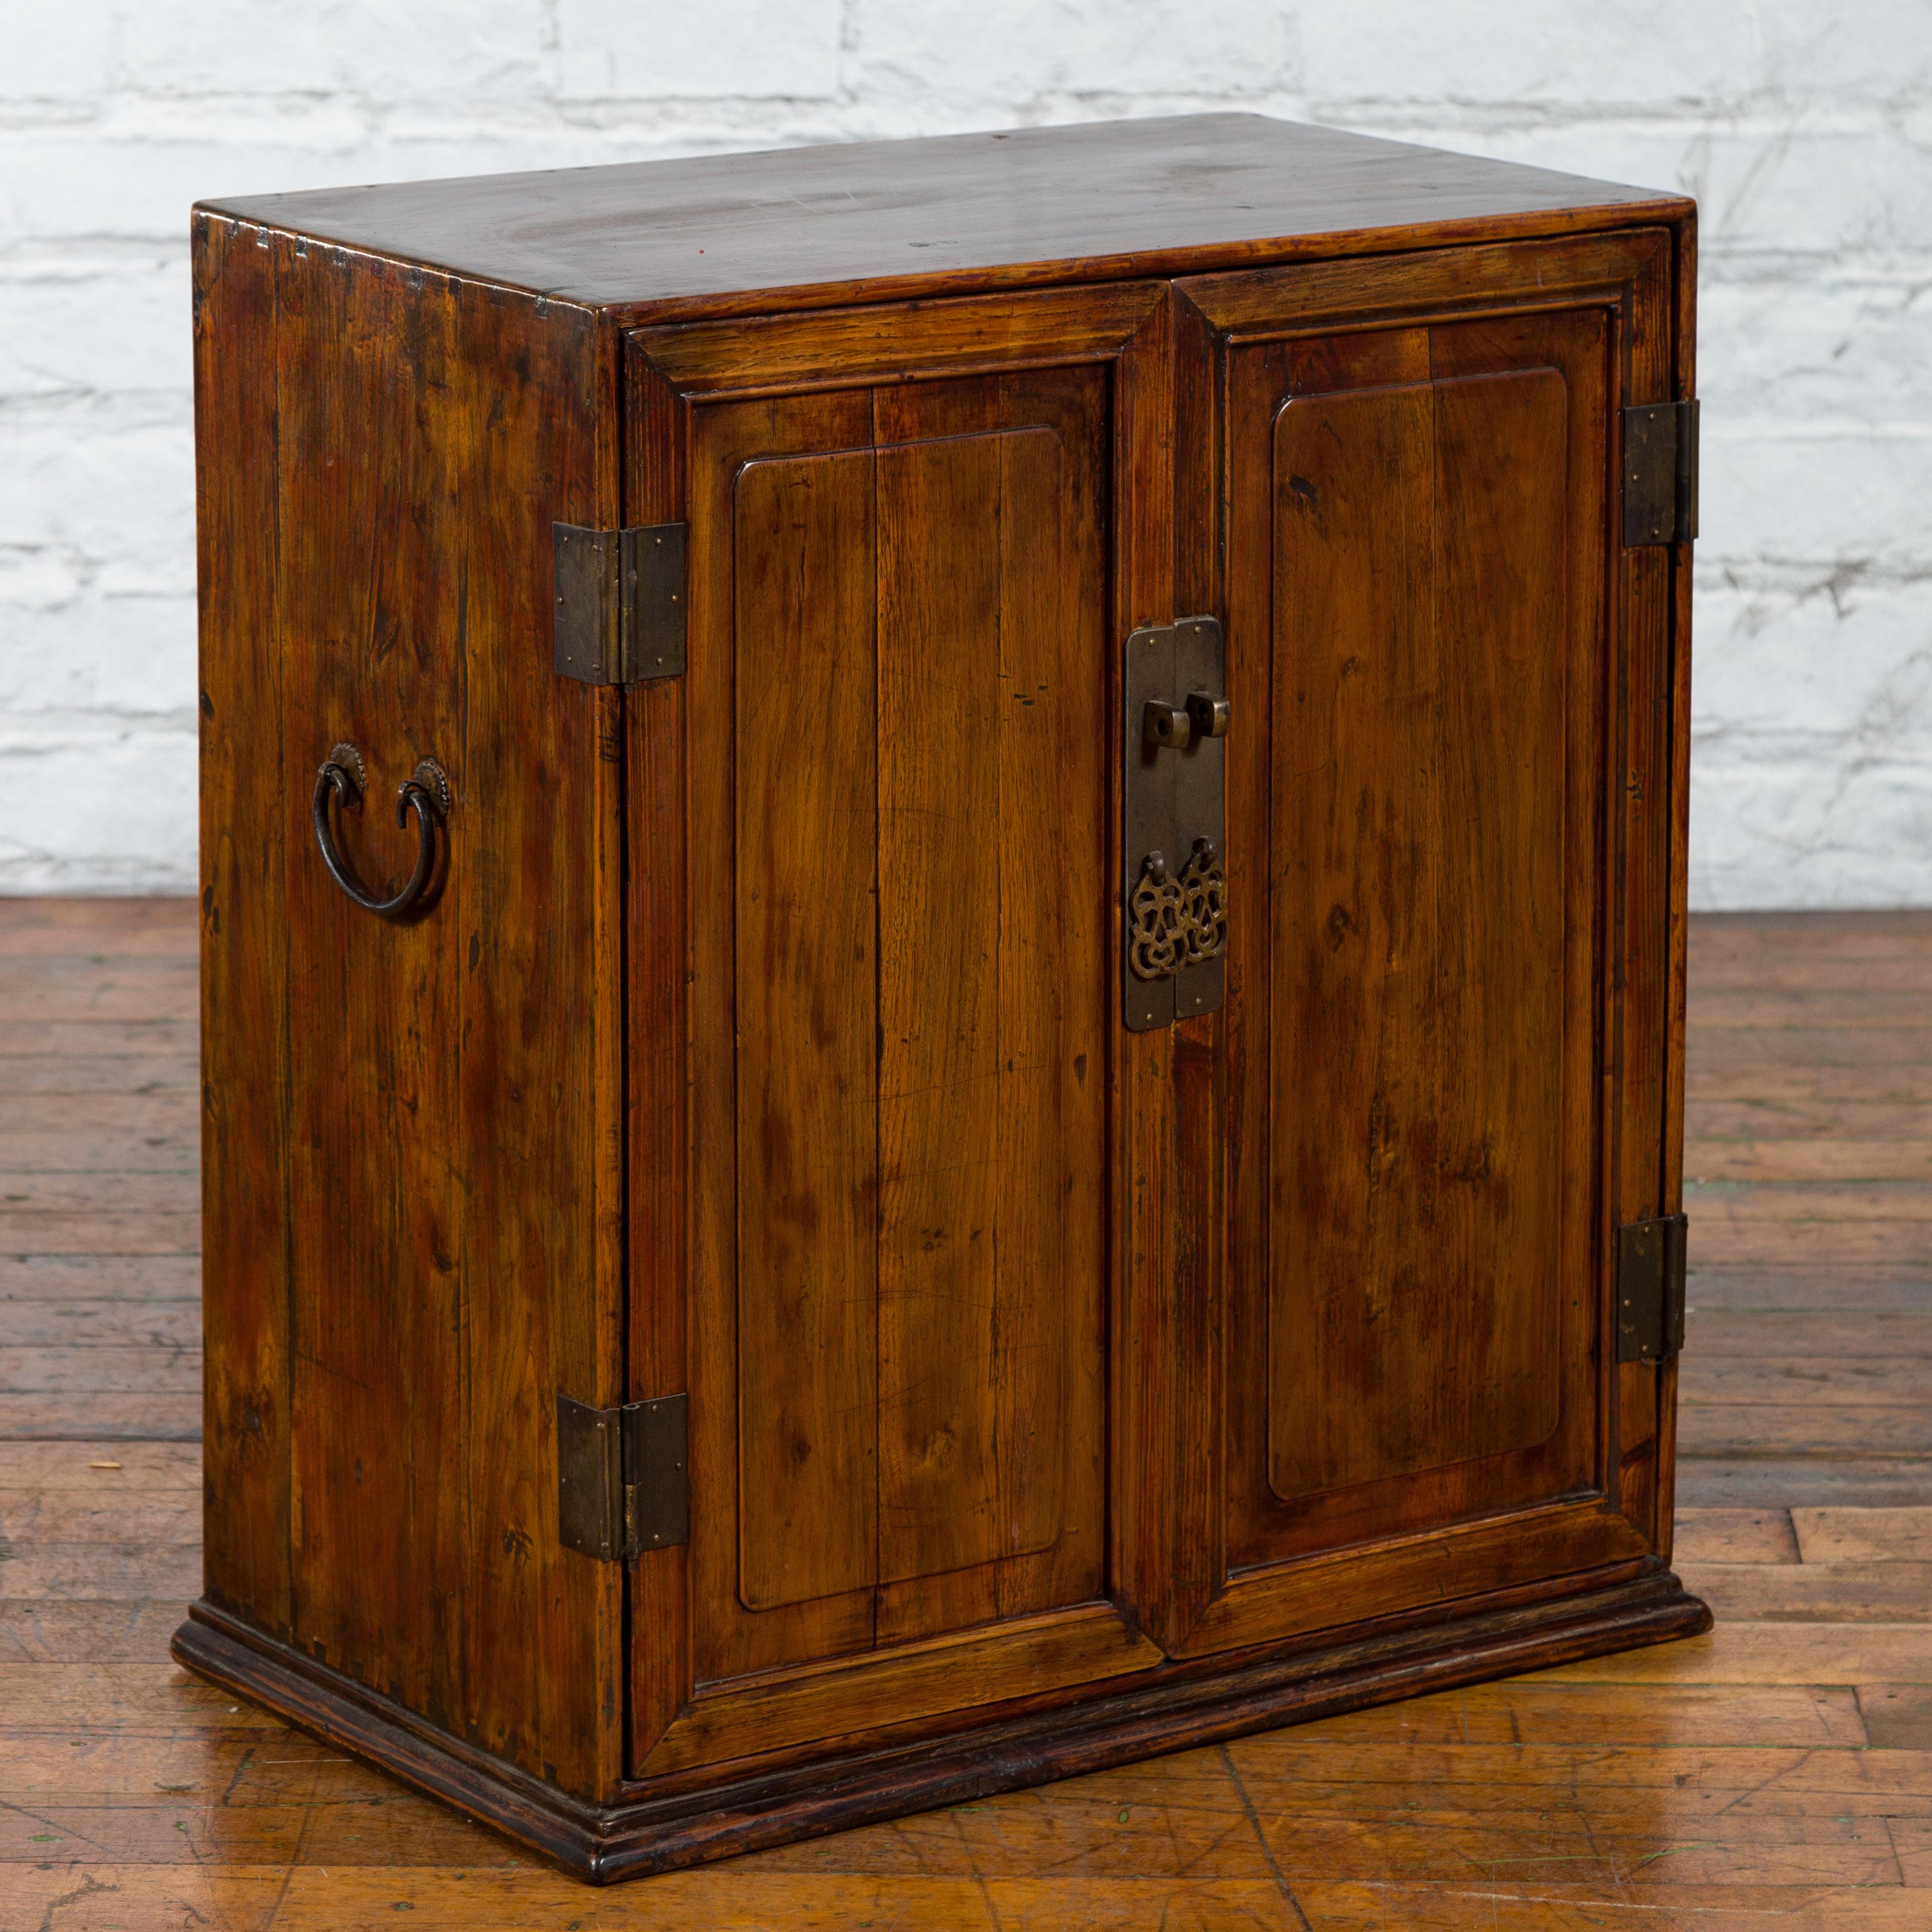 An antique Chinese elm wood side cabinet from the early 20th century, with slightly raised panels and brass hardware. Created in China during the early years of the 20th century, this low side cabinet features a linear silhouette perfectly